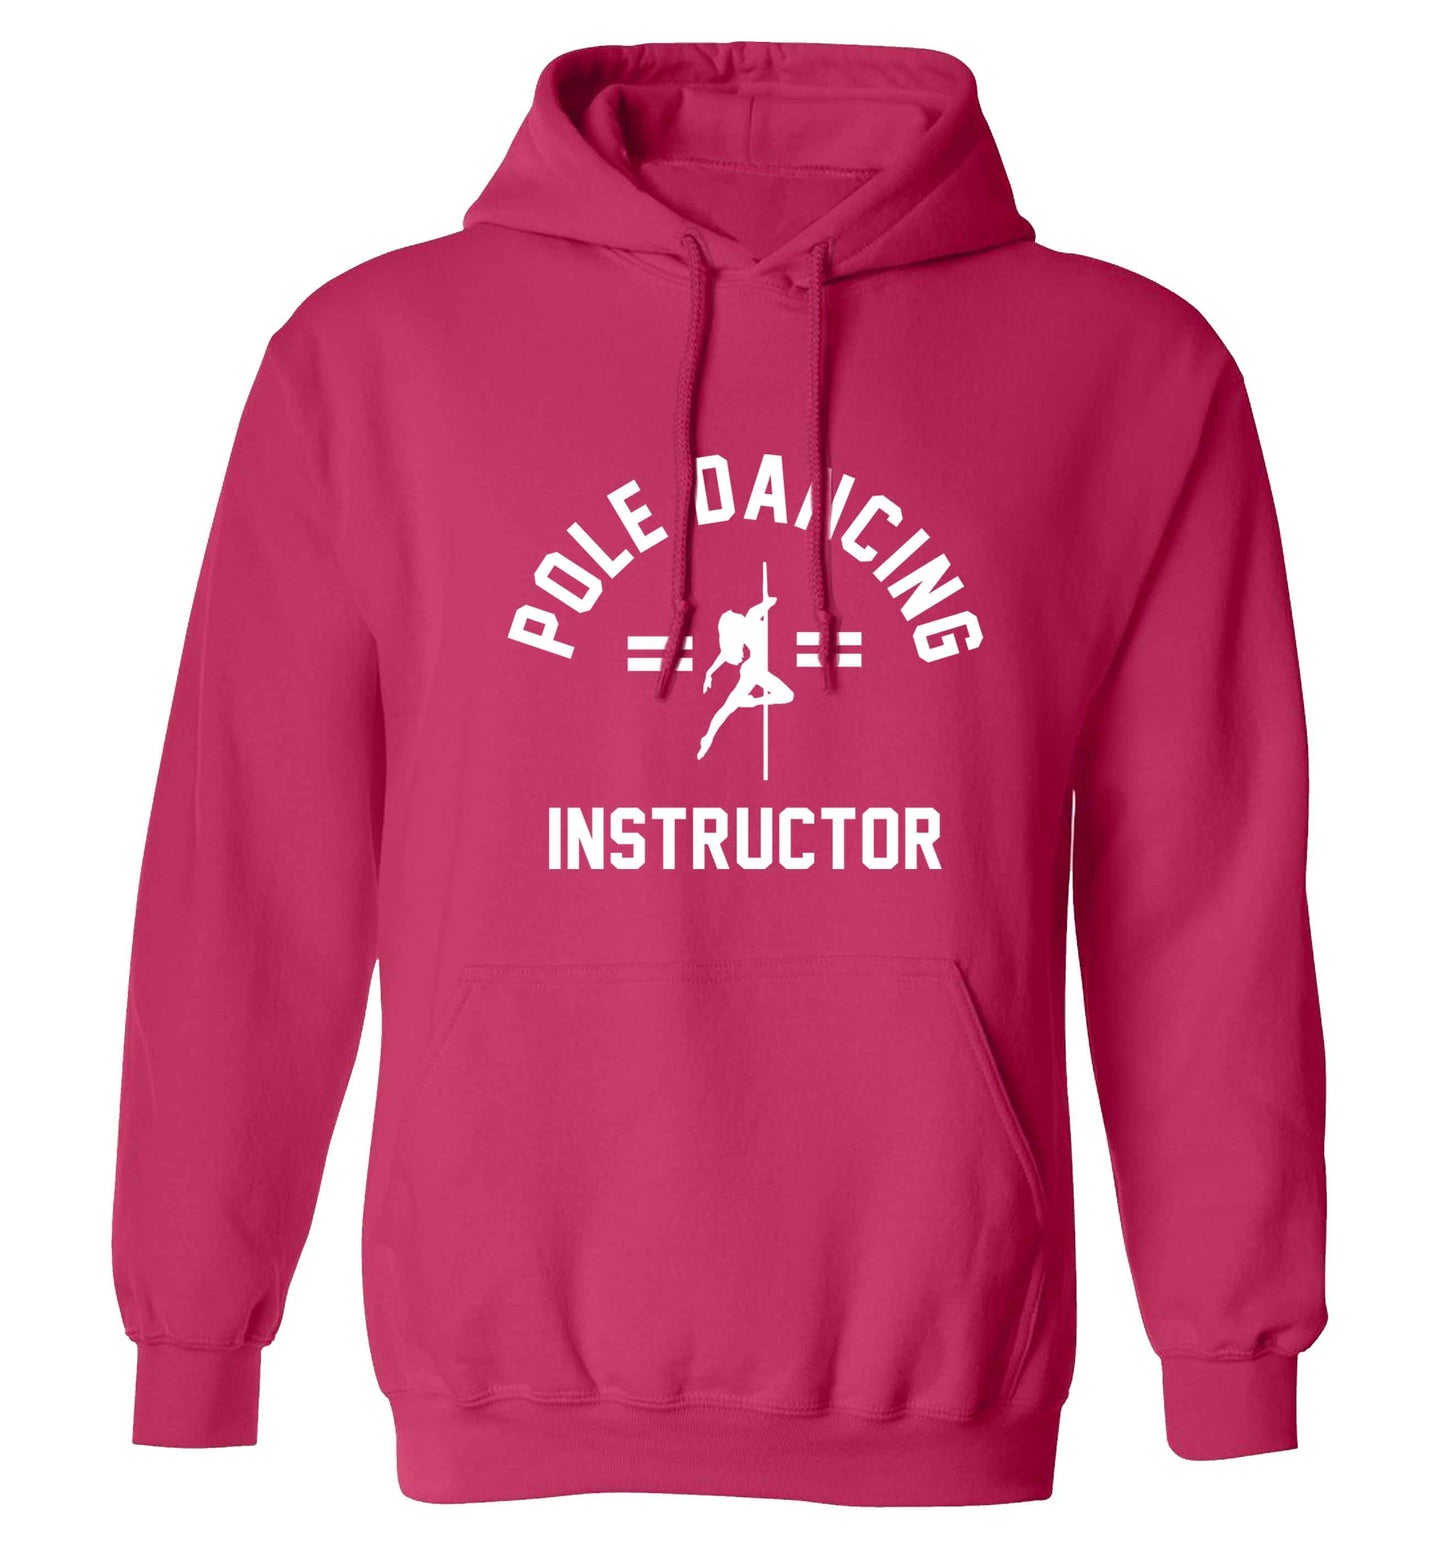 Pole dancing instructor adults unisex pink hoodie 2XL